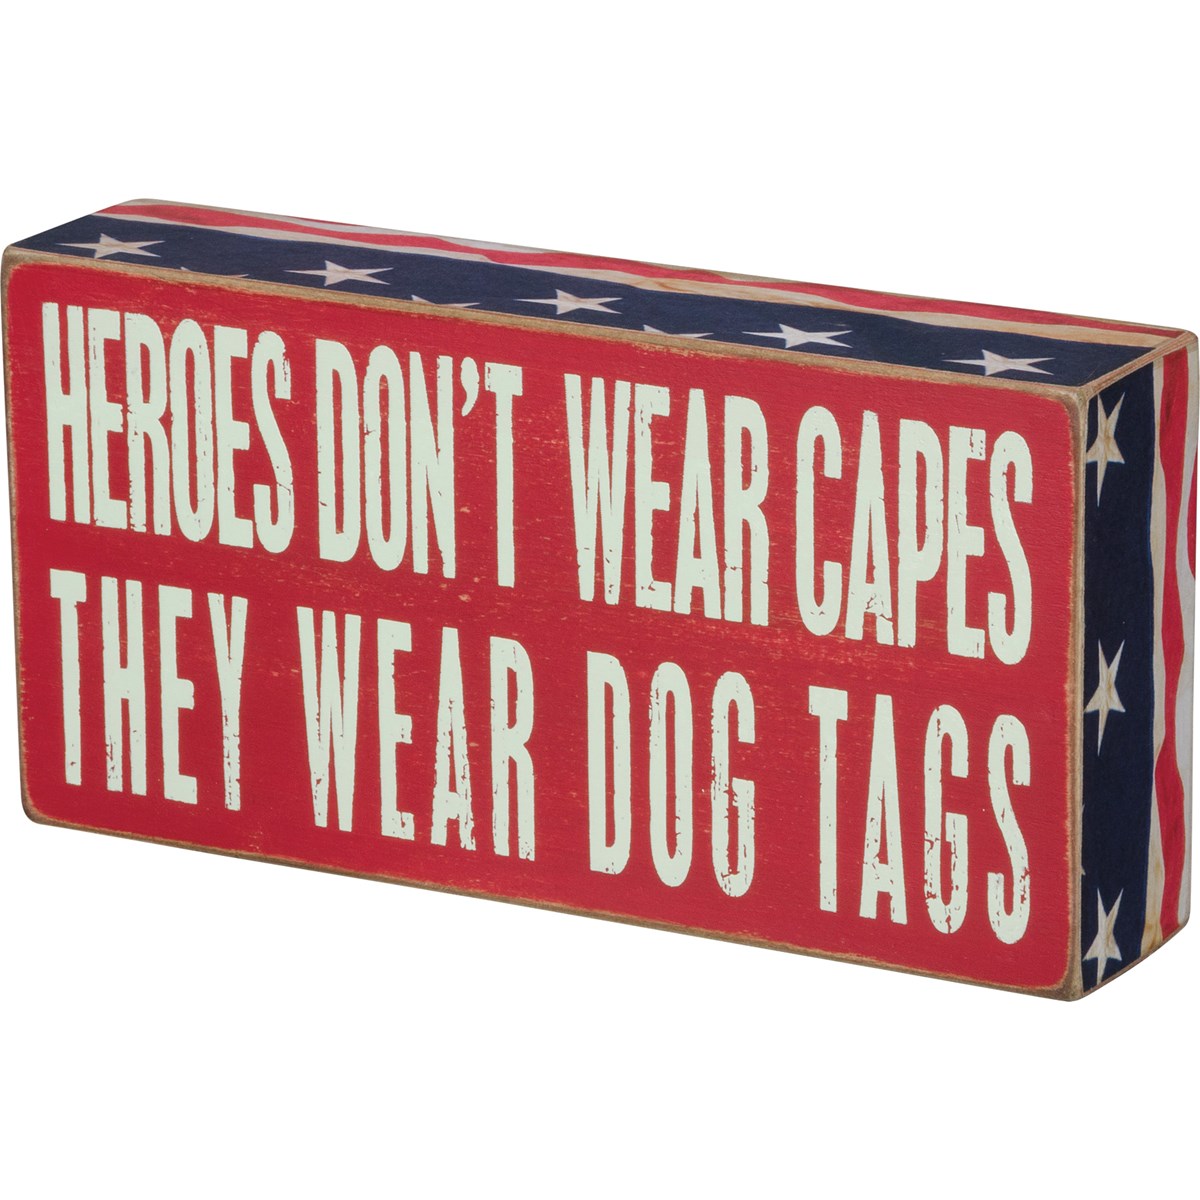 Heroes Dog Tags Box Sign - Wood, Paper